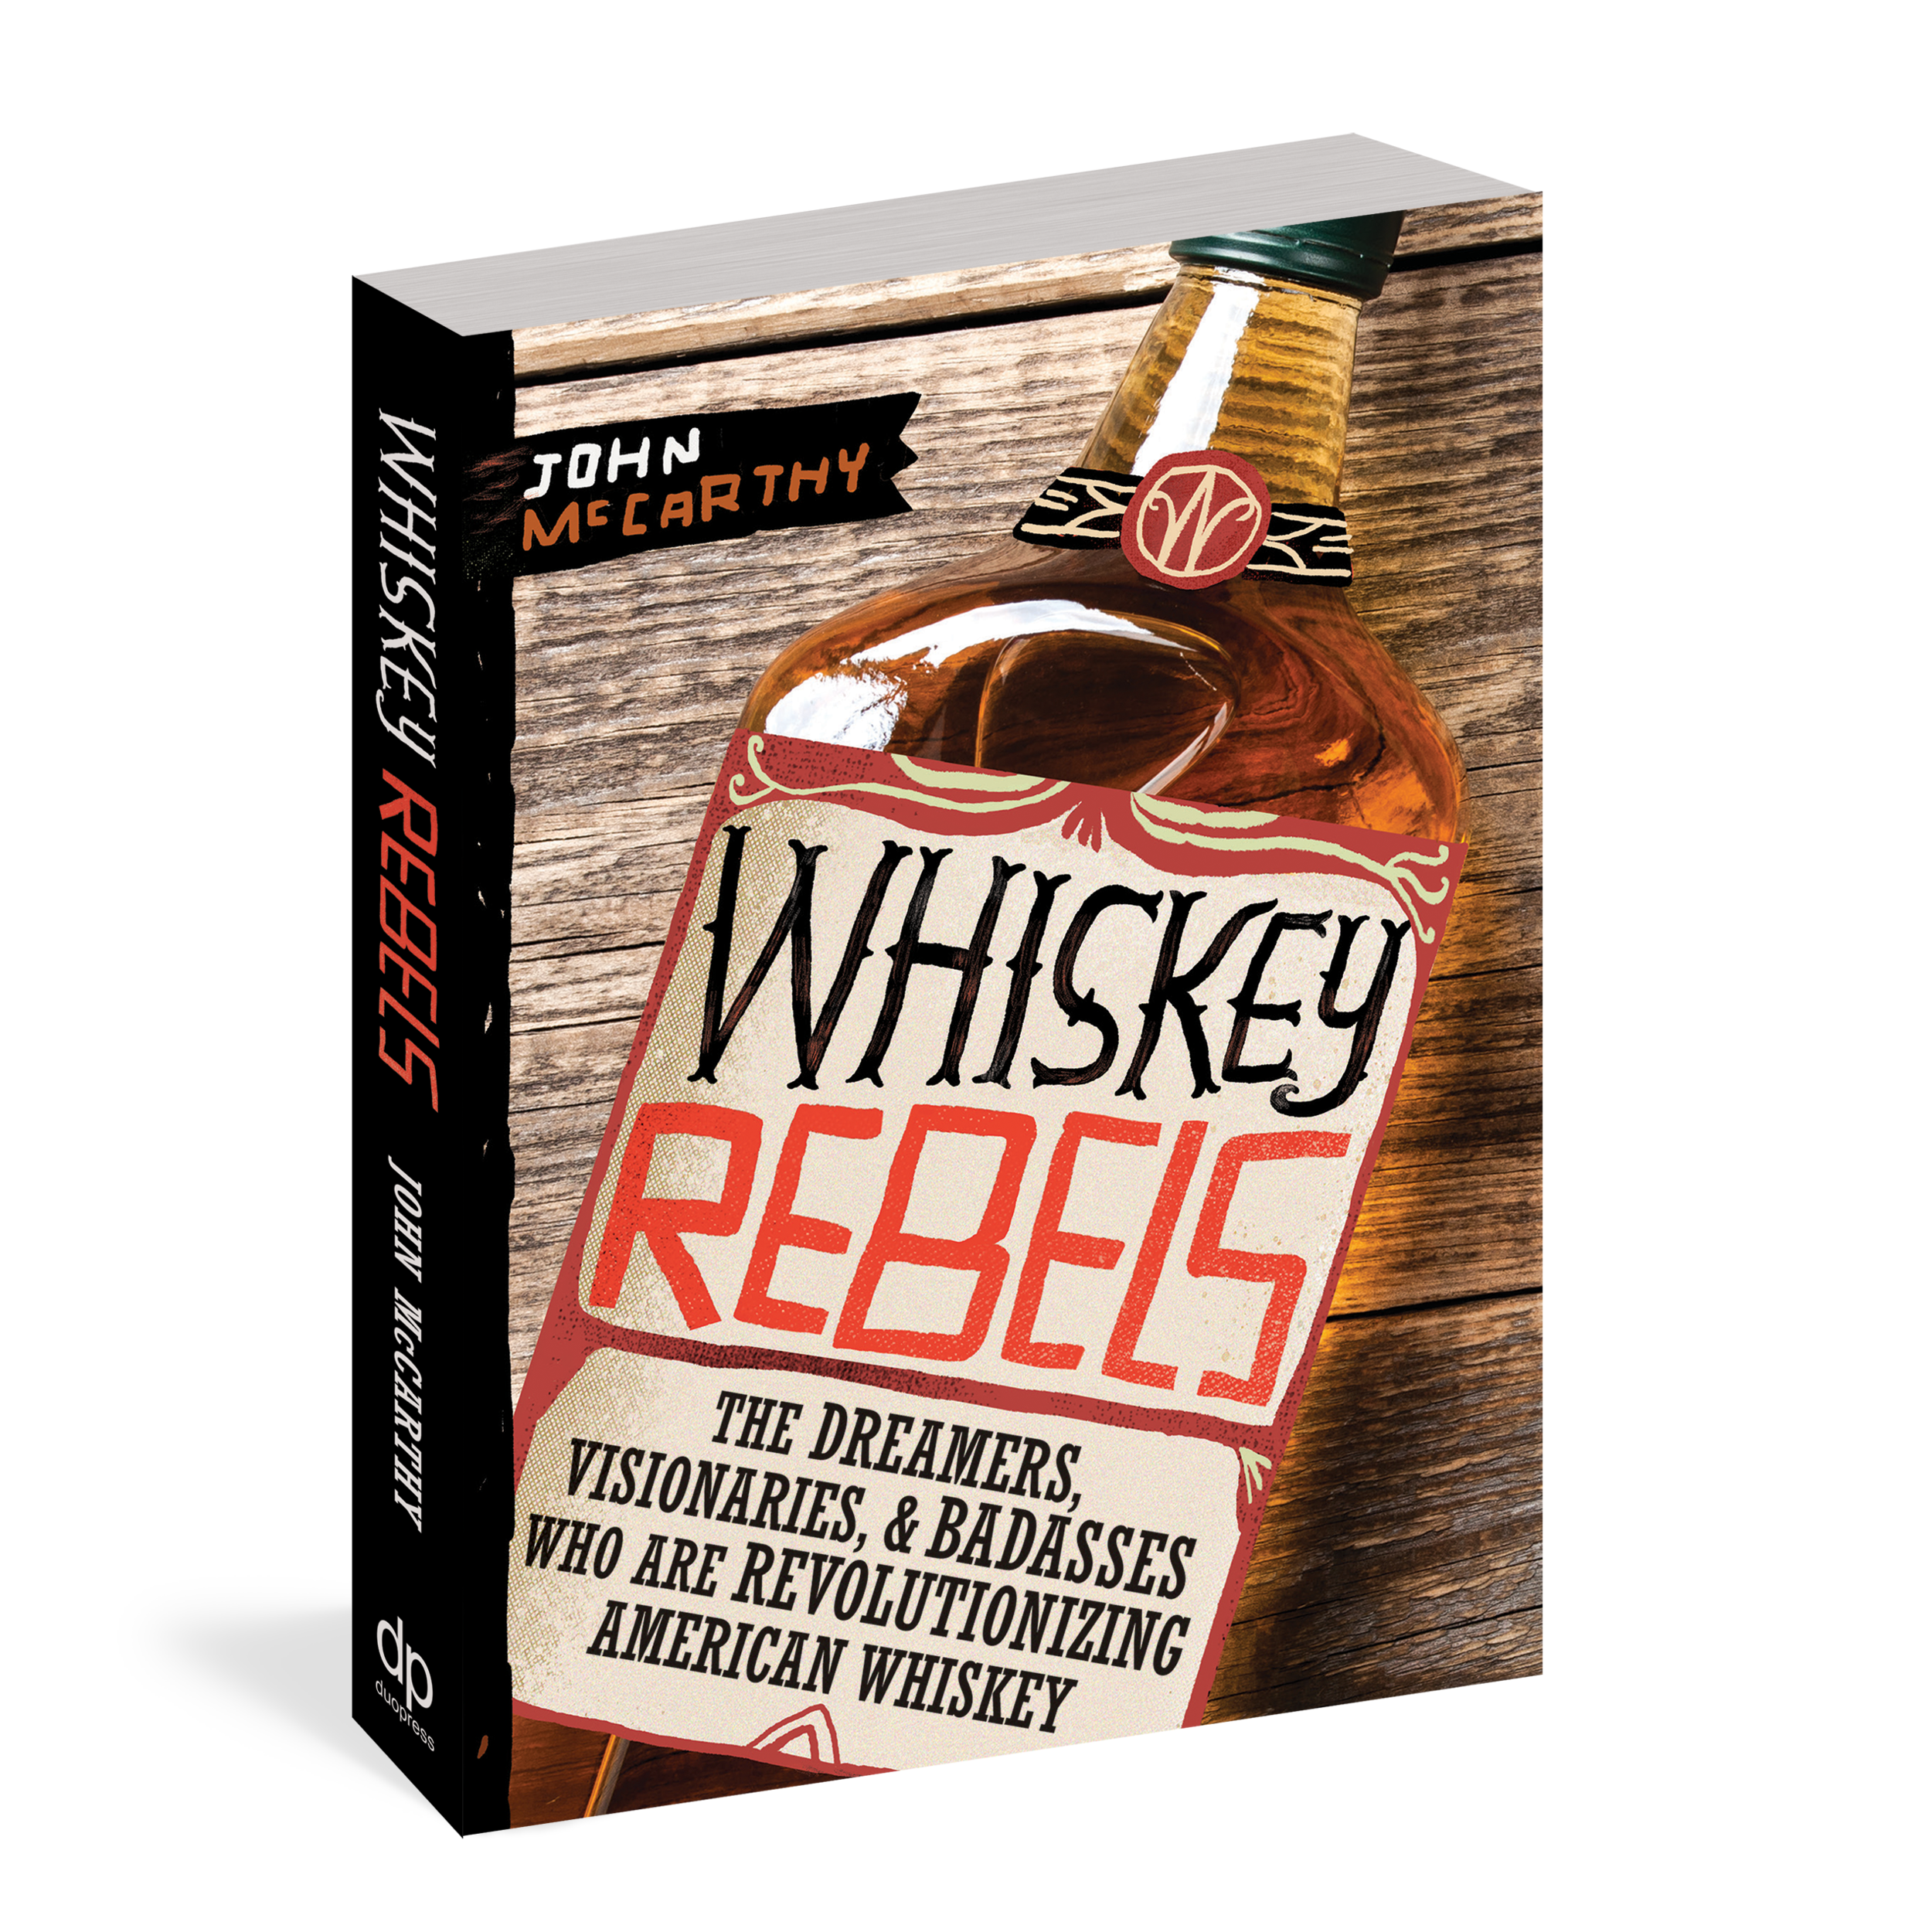 Whiskey Rebels: The Dreamers, Visionaries &amp; Badasses Who Are Revolutionizing American Whiskey (Copy) (Copy) (Copy) (Copy) (Copy)